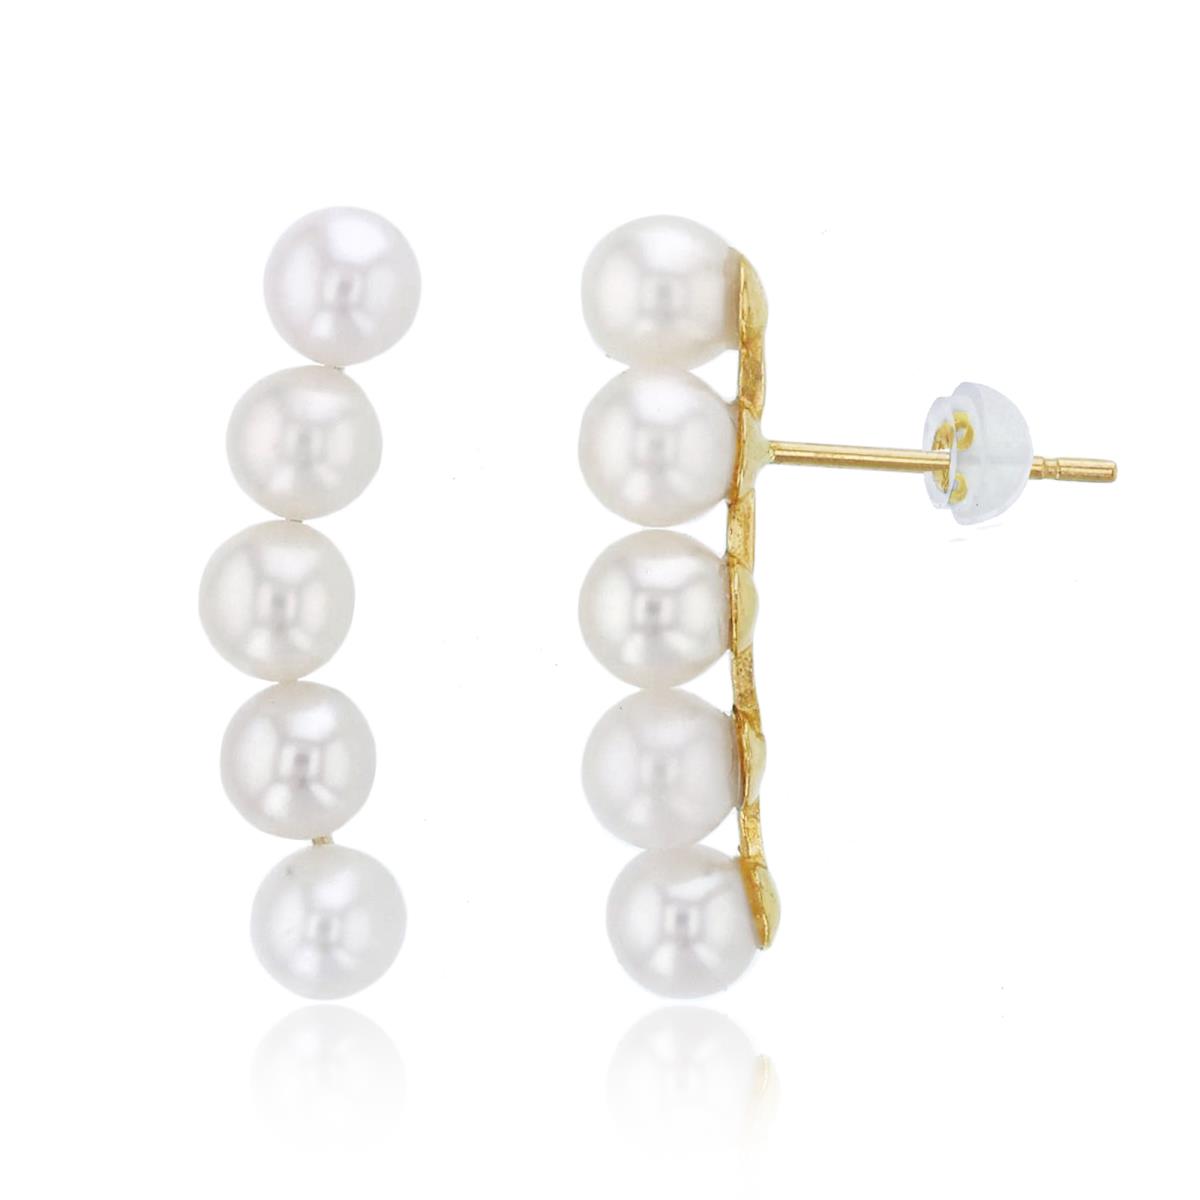 10K Yellow Gold 4mm Rnd Fresh Water Pearl Crawl Earrings with Silicon Backs